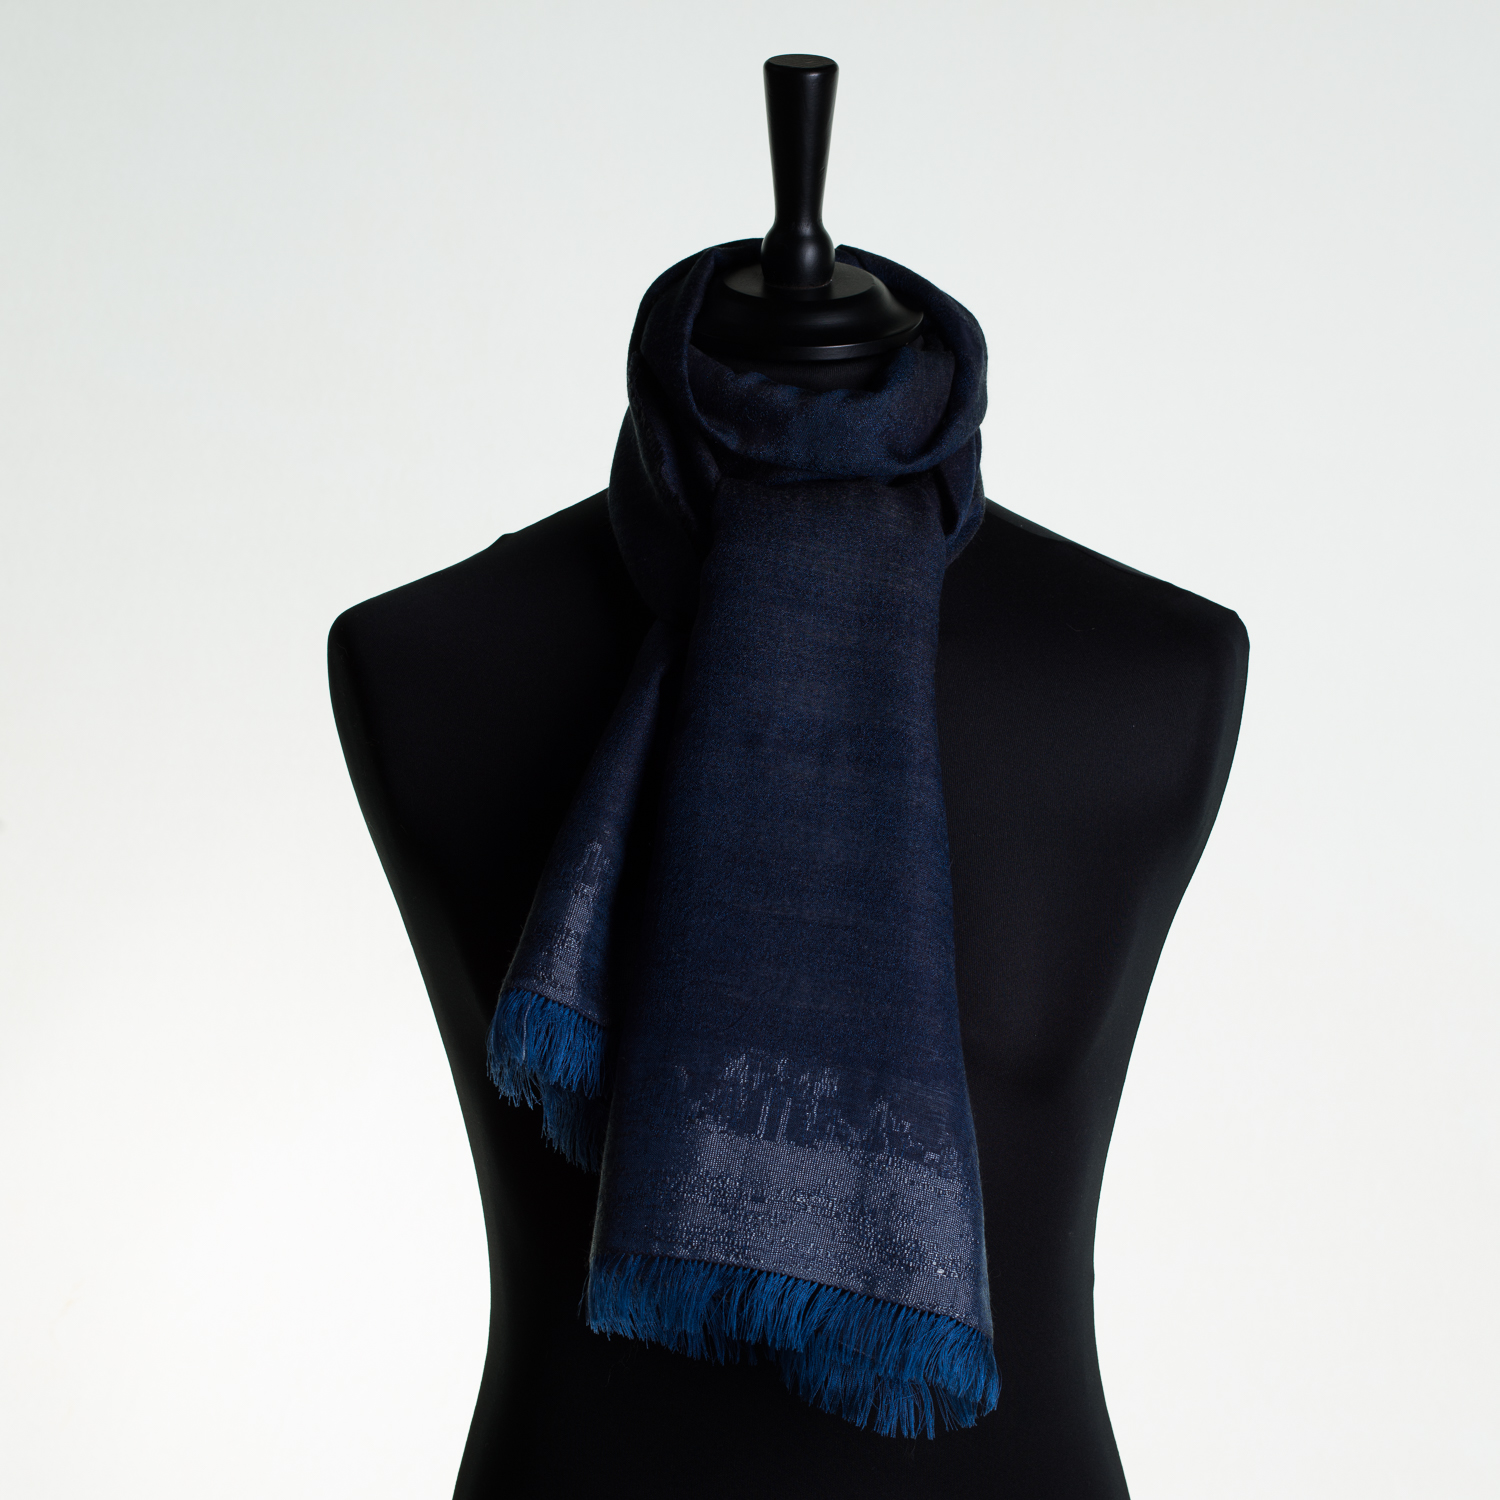 HOT CITY 'SKY' LONG SILK AND CASHMERE SCARF